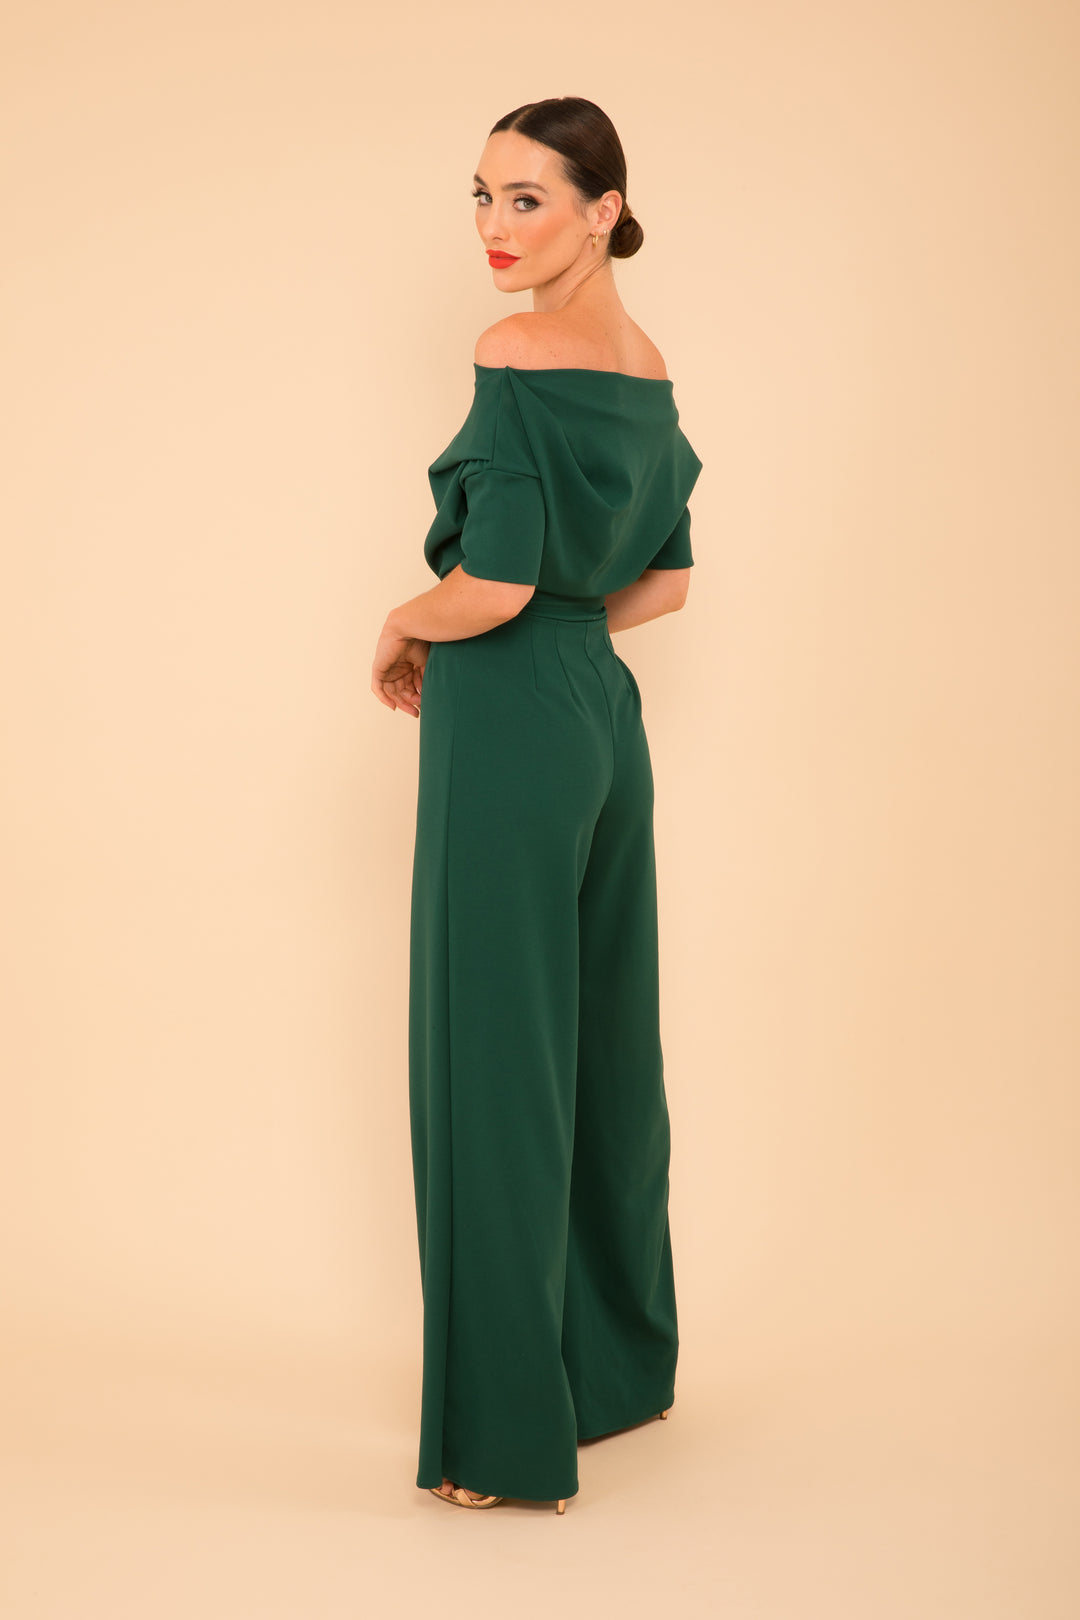 ATOM LABEL lima jumpsuit in forest green